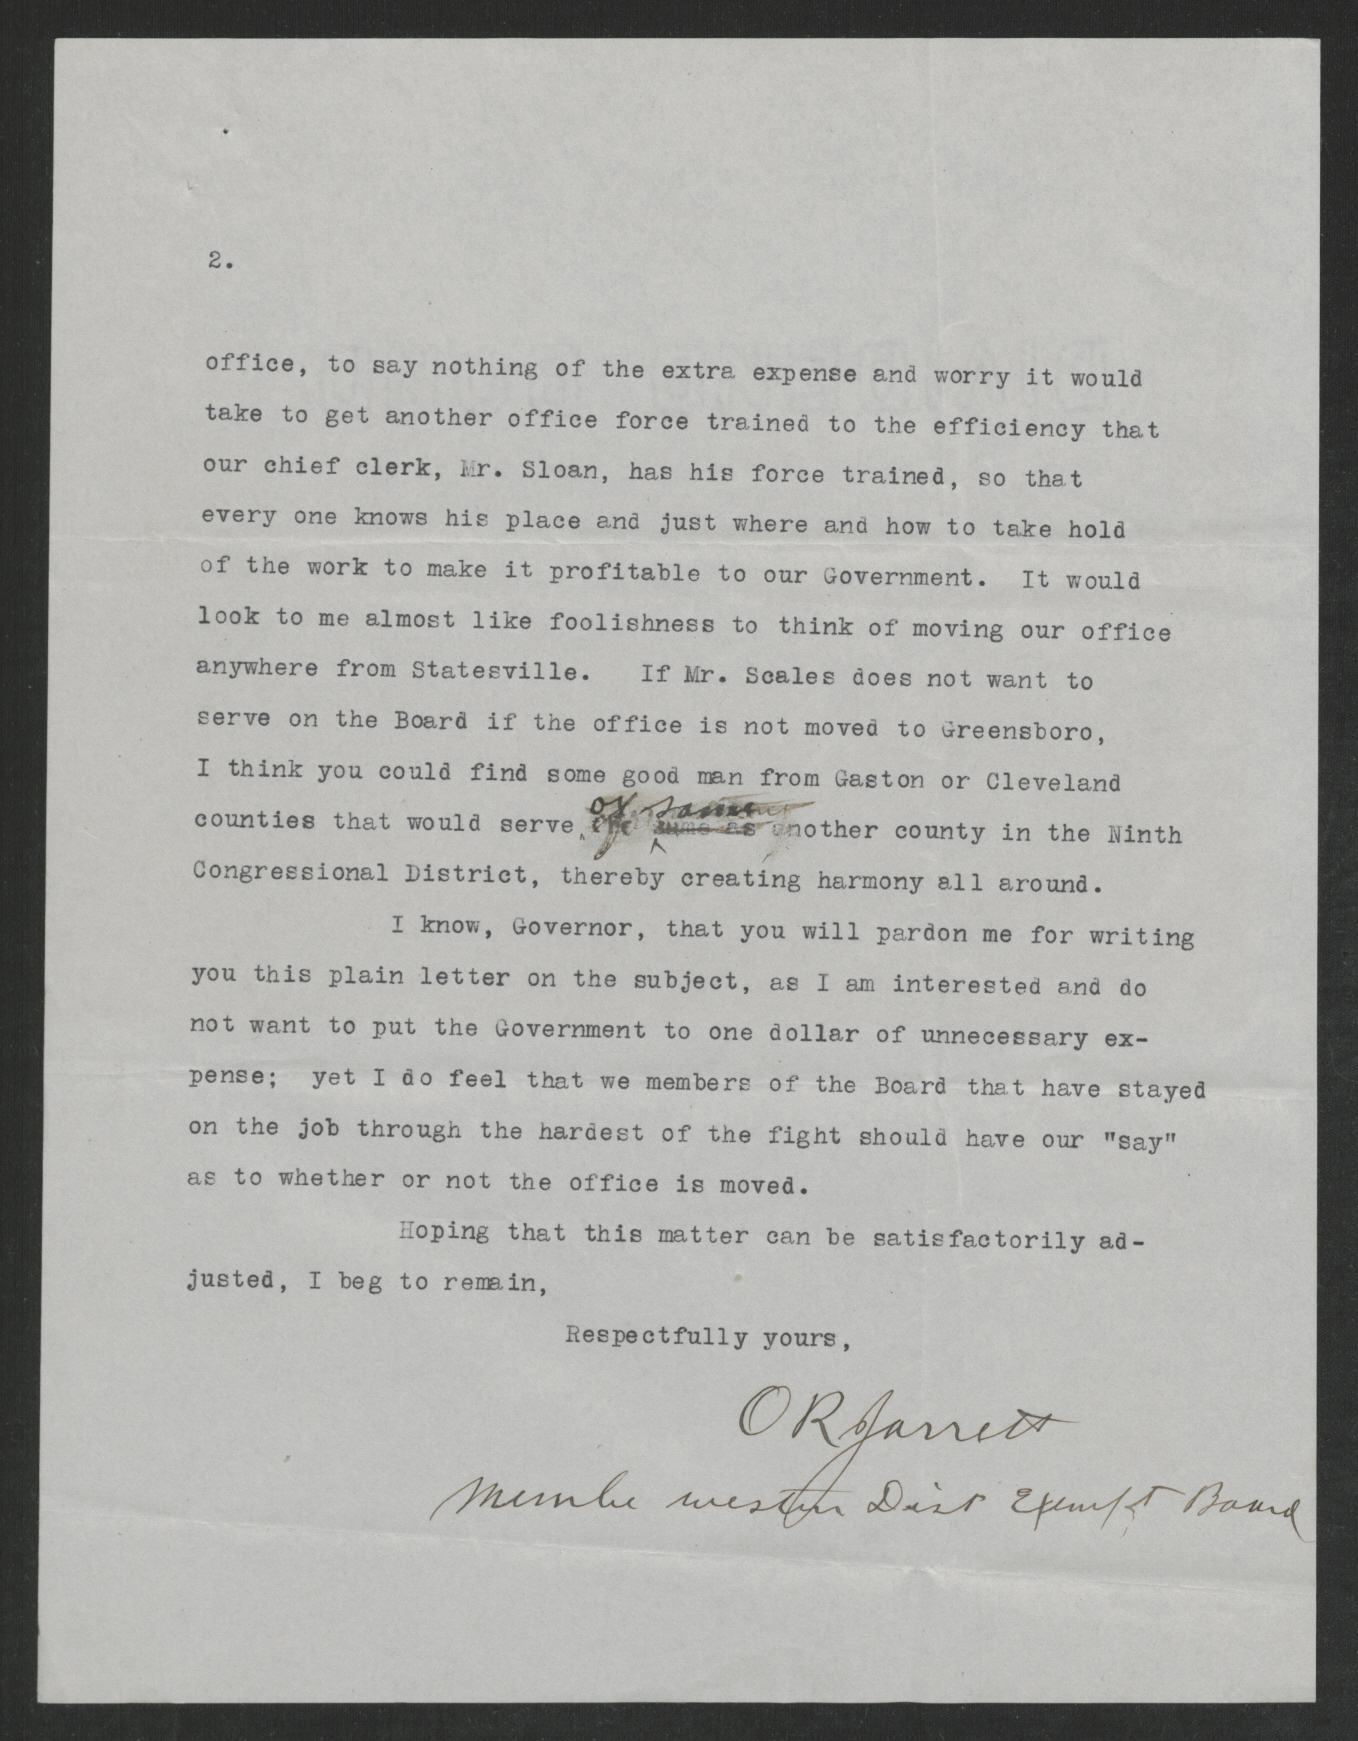 Letter from Otto R. Jarrett to Thomas W. Bickett, January 8, 1918, page 2